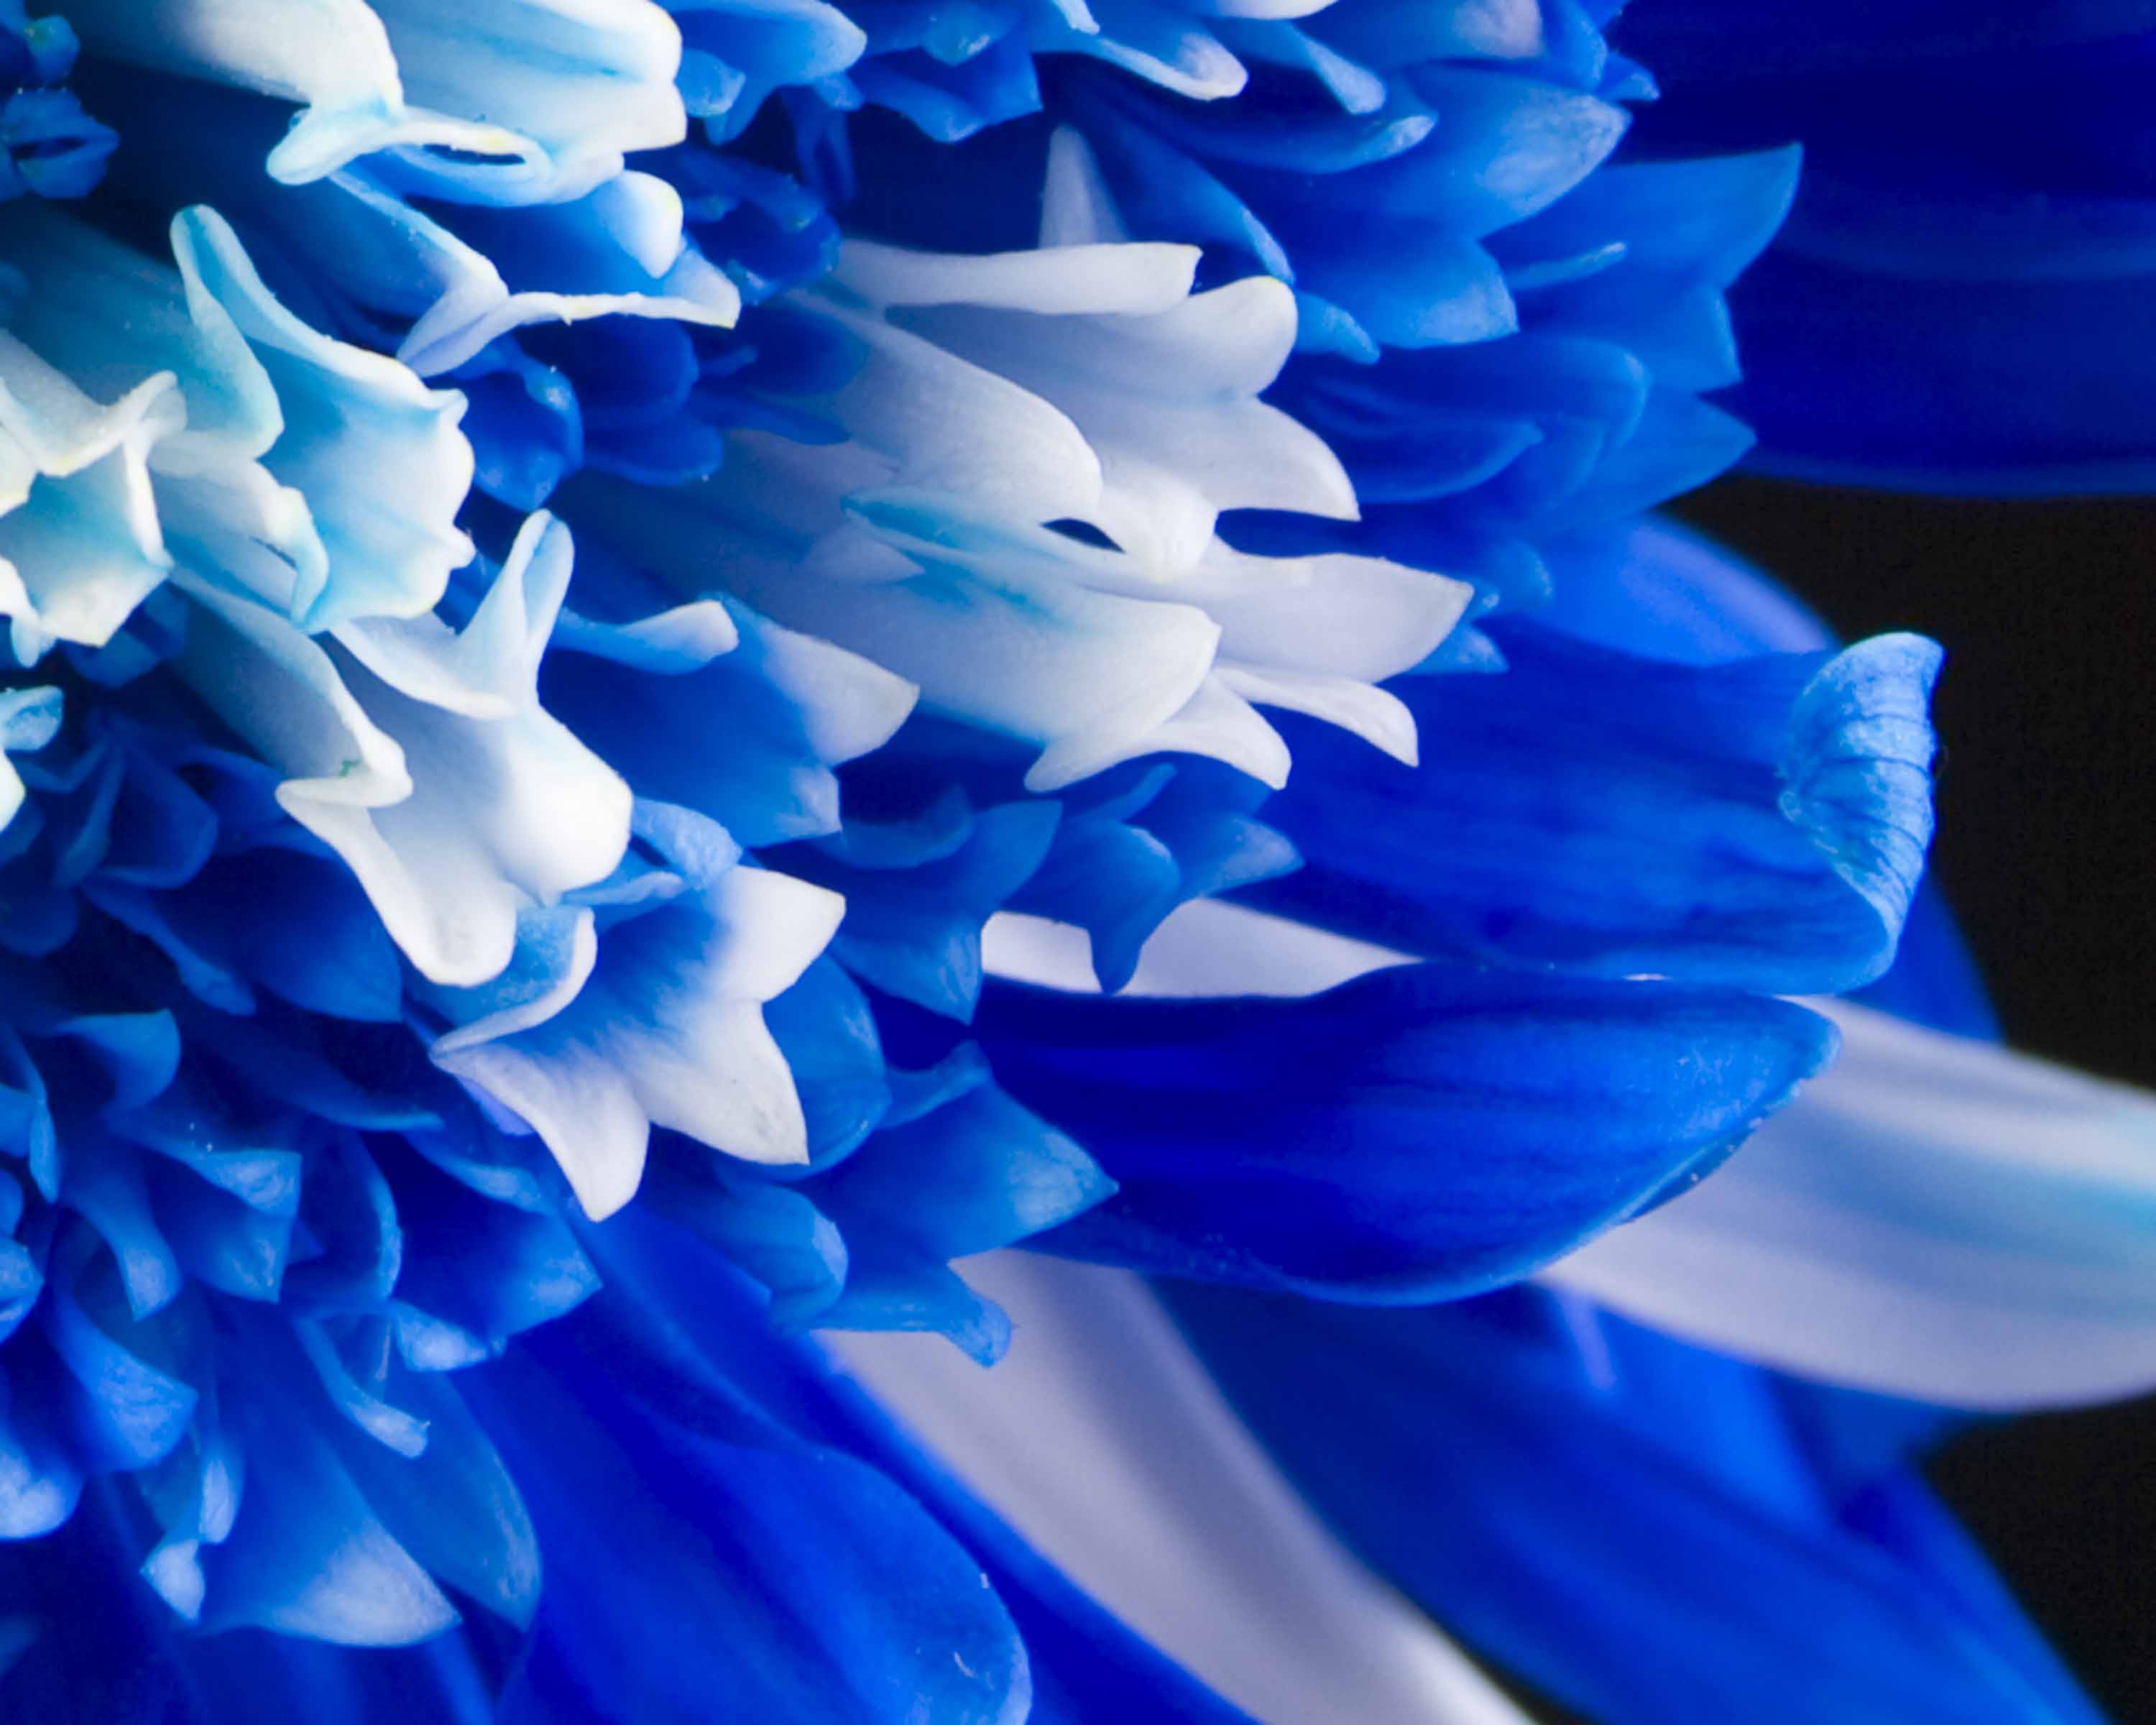 Blue Flowers Picture And Names Widescreen 2 HD Wallpaper. aduphoto